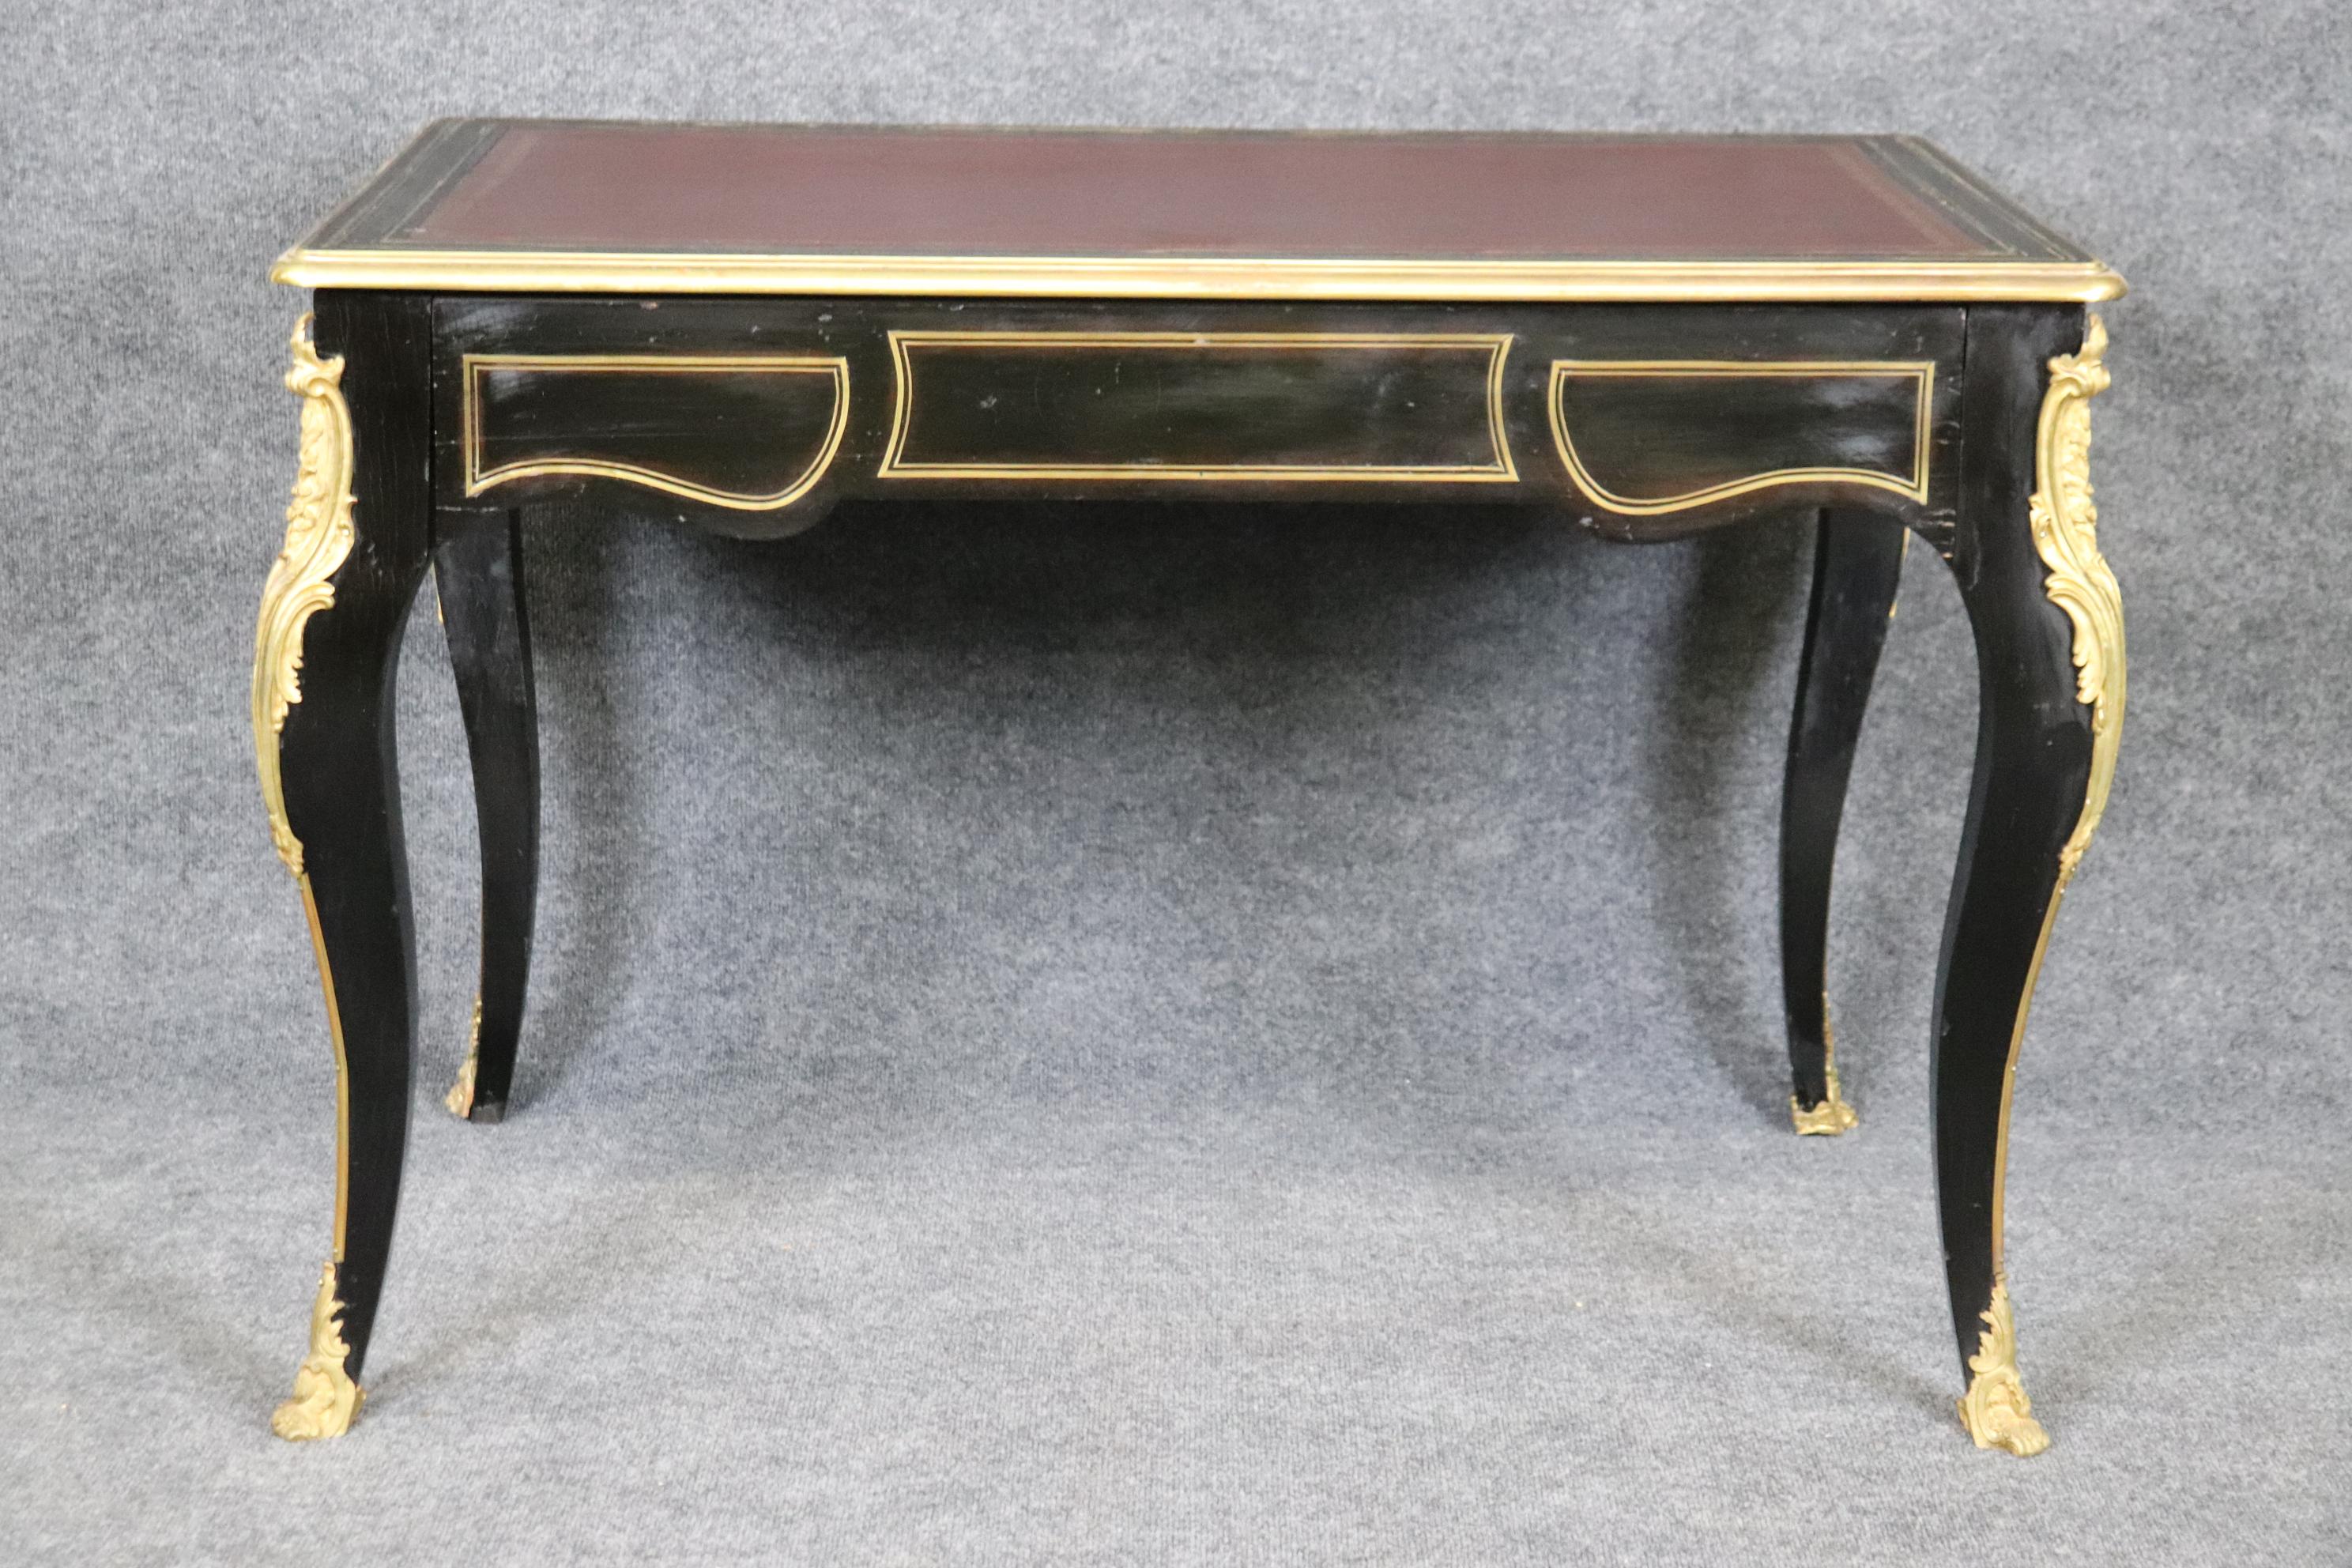 This is a gorgeous superb quality desk. The desk features incredible bronze ormolu and mounts and a rich leather top. The desk Measures 43.5 wide x 27 deep x 30 tall. Dates to the 1970s era. 